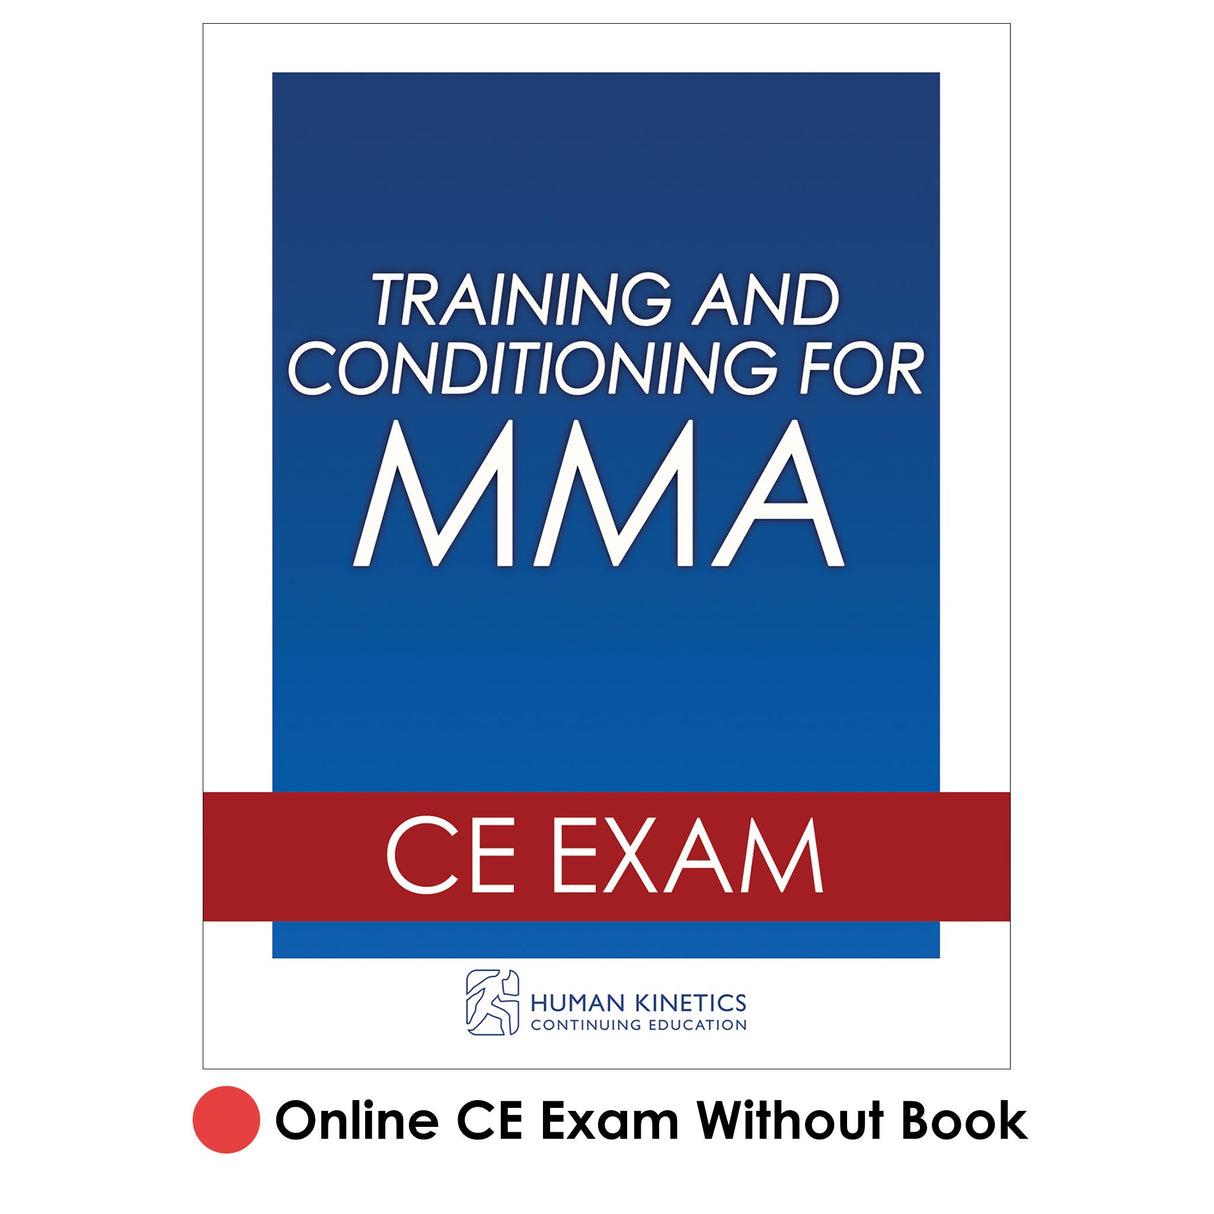 Training and Conditioning for MMA Online CE Exam Without Book